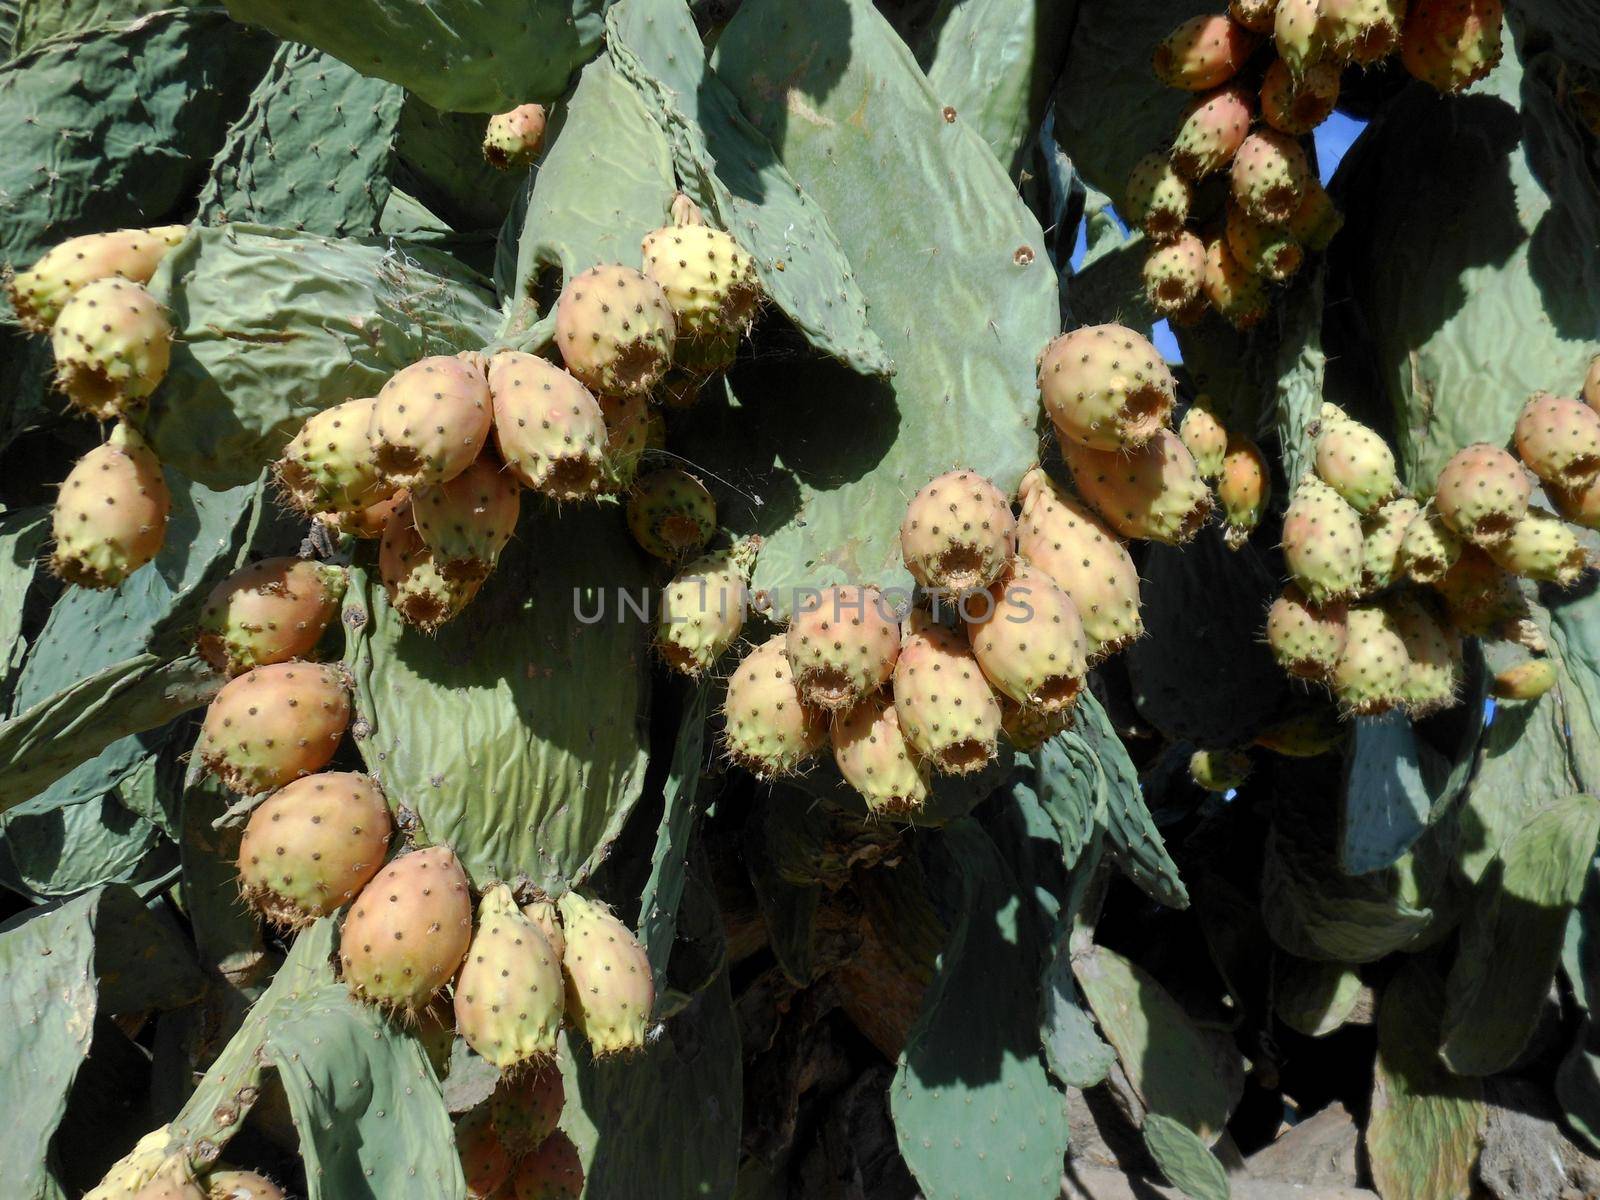 Prickly pears in the prickly pear ripening